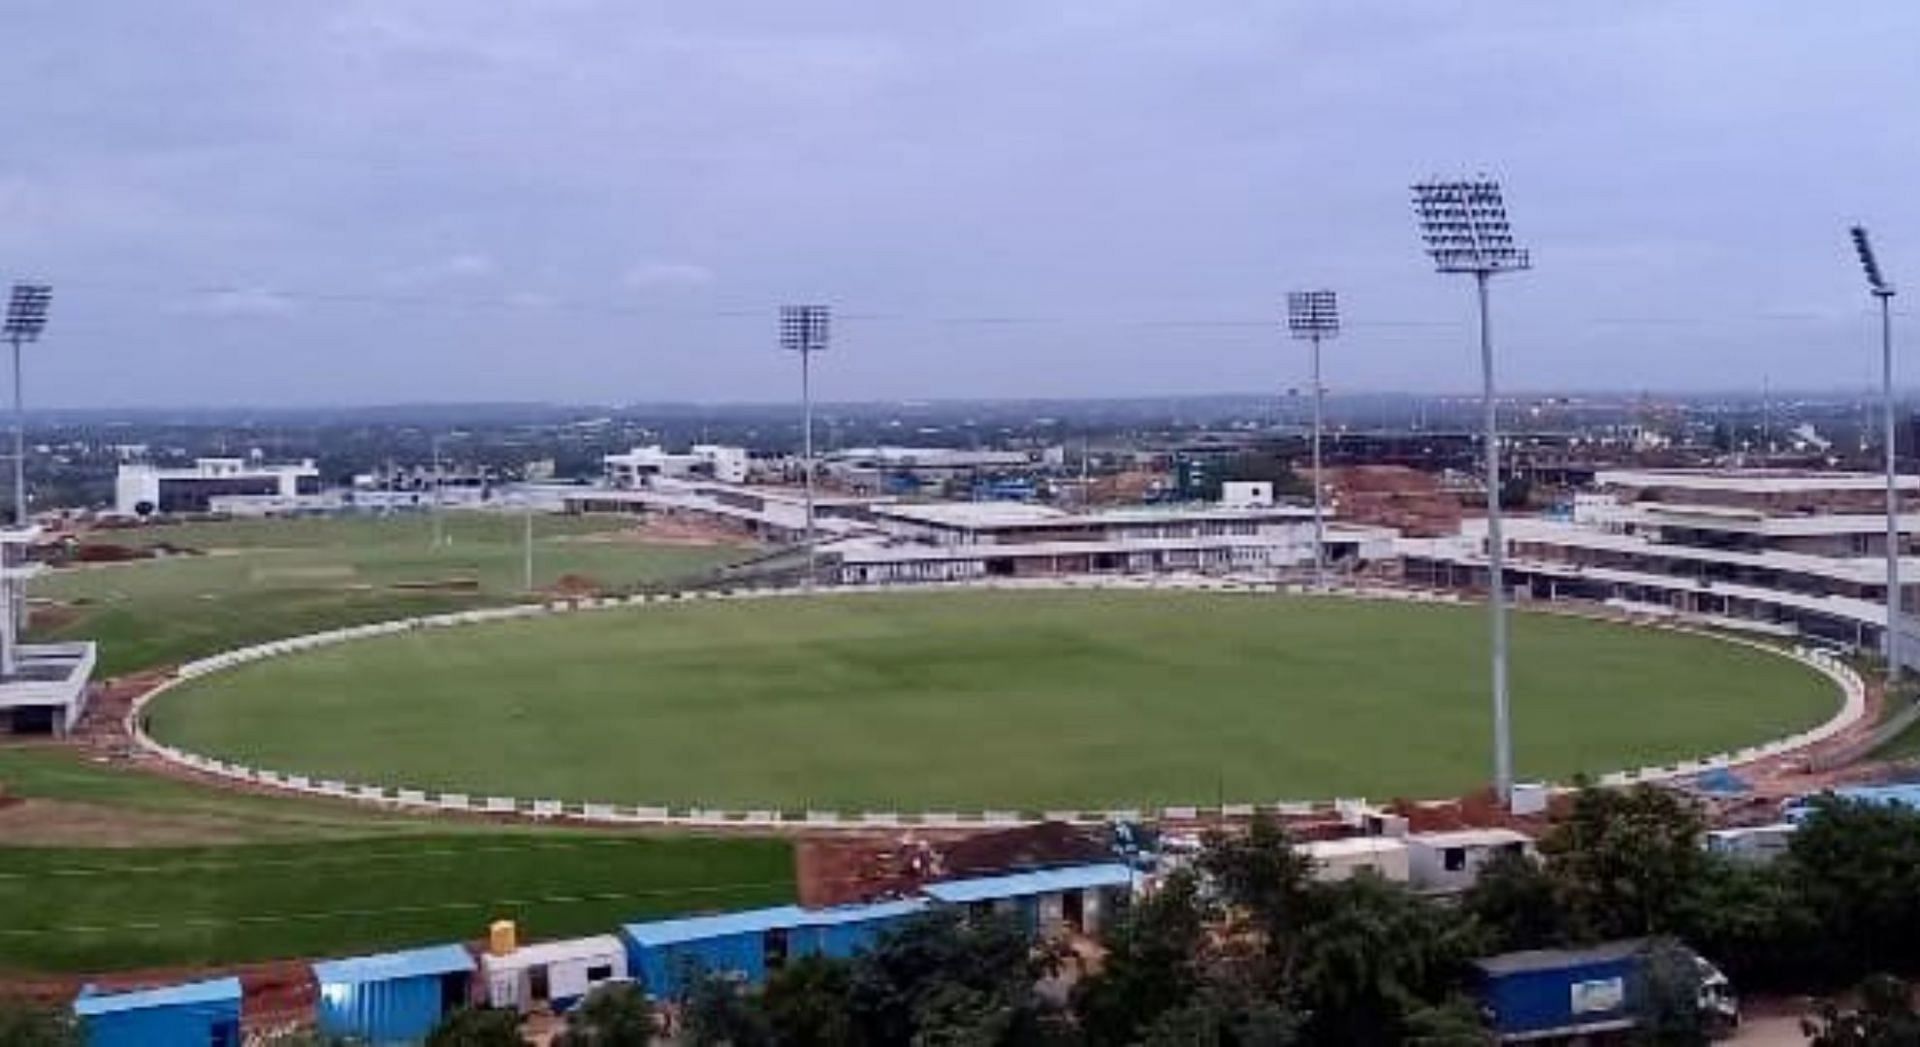 [In Pictures] “New NCA will feature three world-class playing grounds” – BCCI secretary Jay Shah announces new NCA facility in Bengaluru to open soon